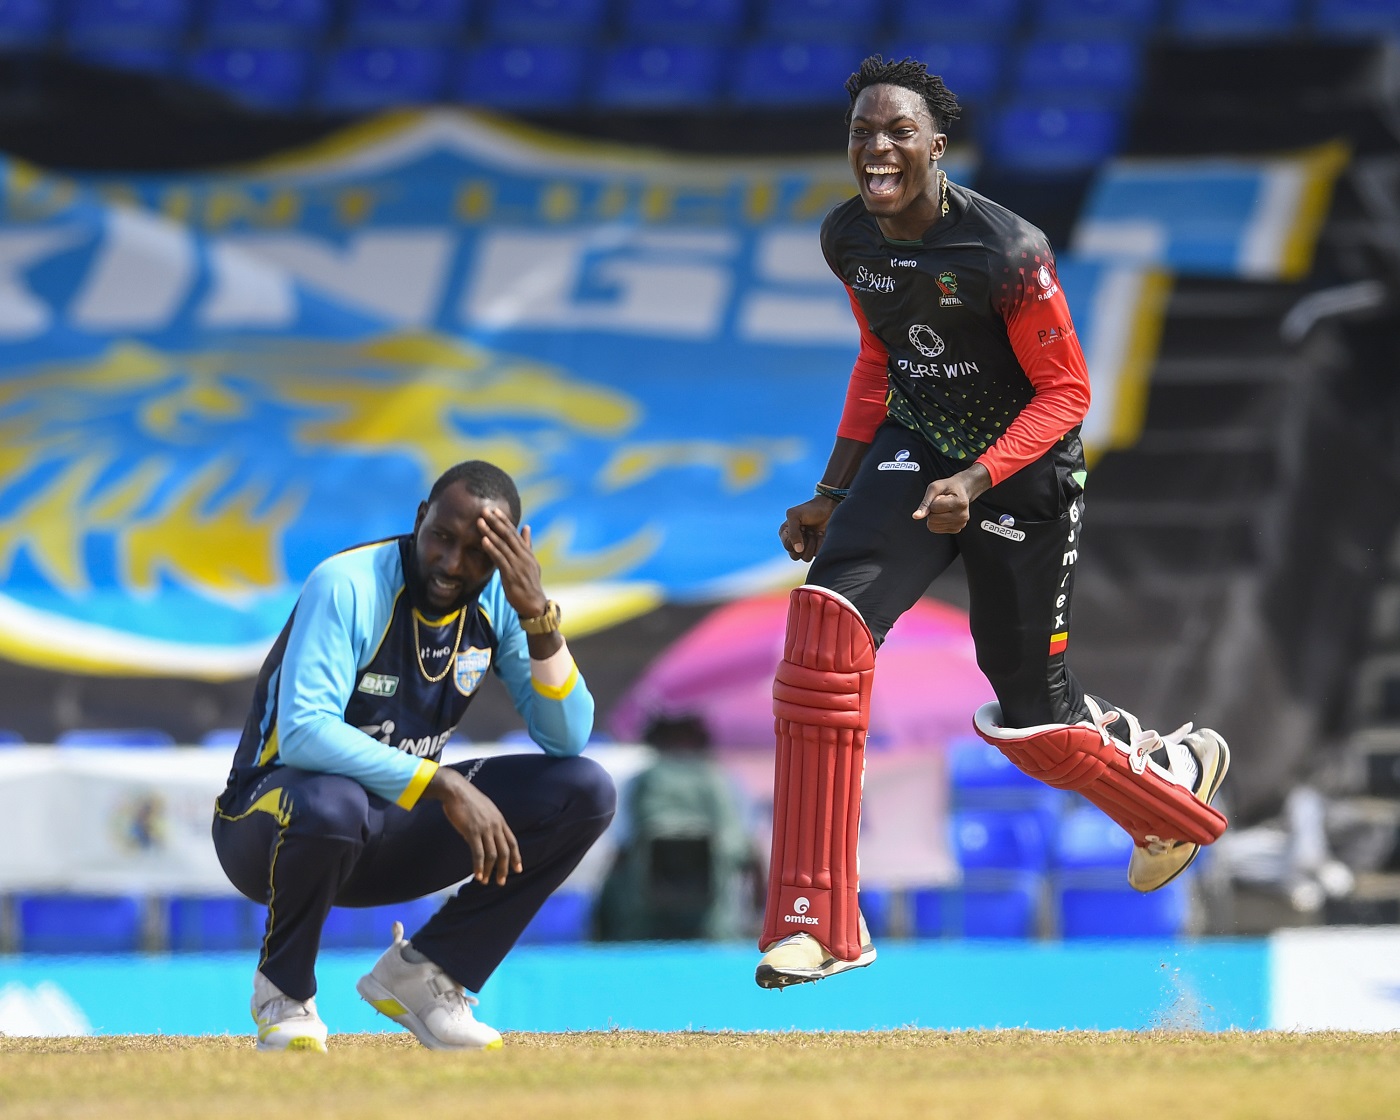 Dominic Drakes made 48* in 24 balls in the final of CPL 2021 | Getty